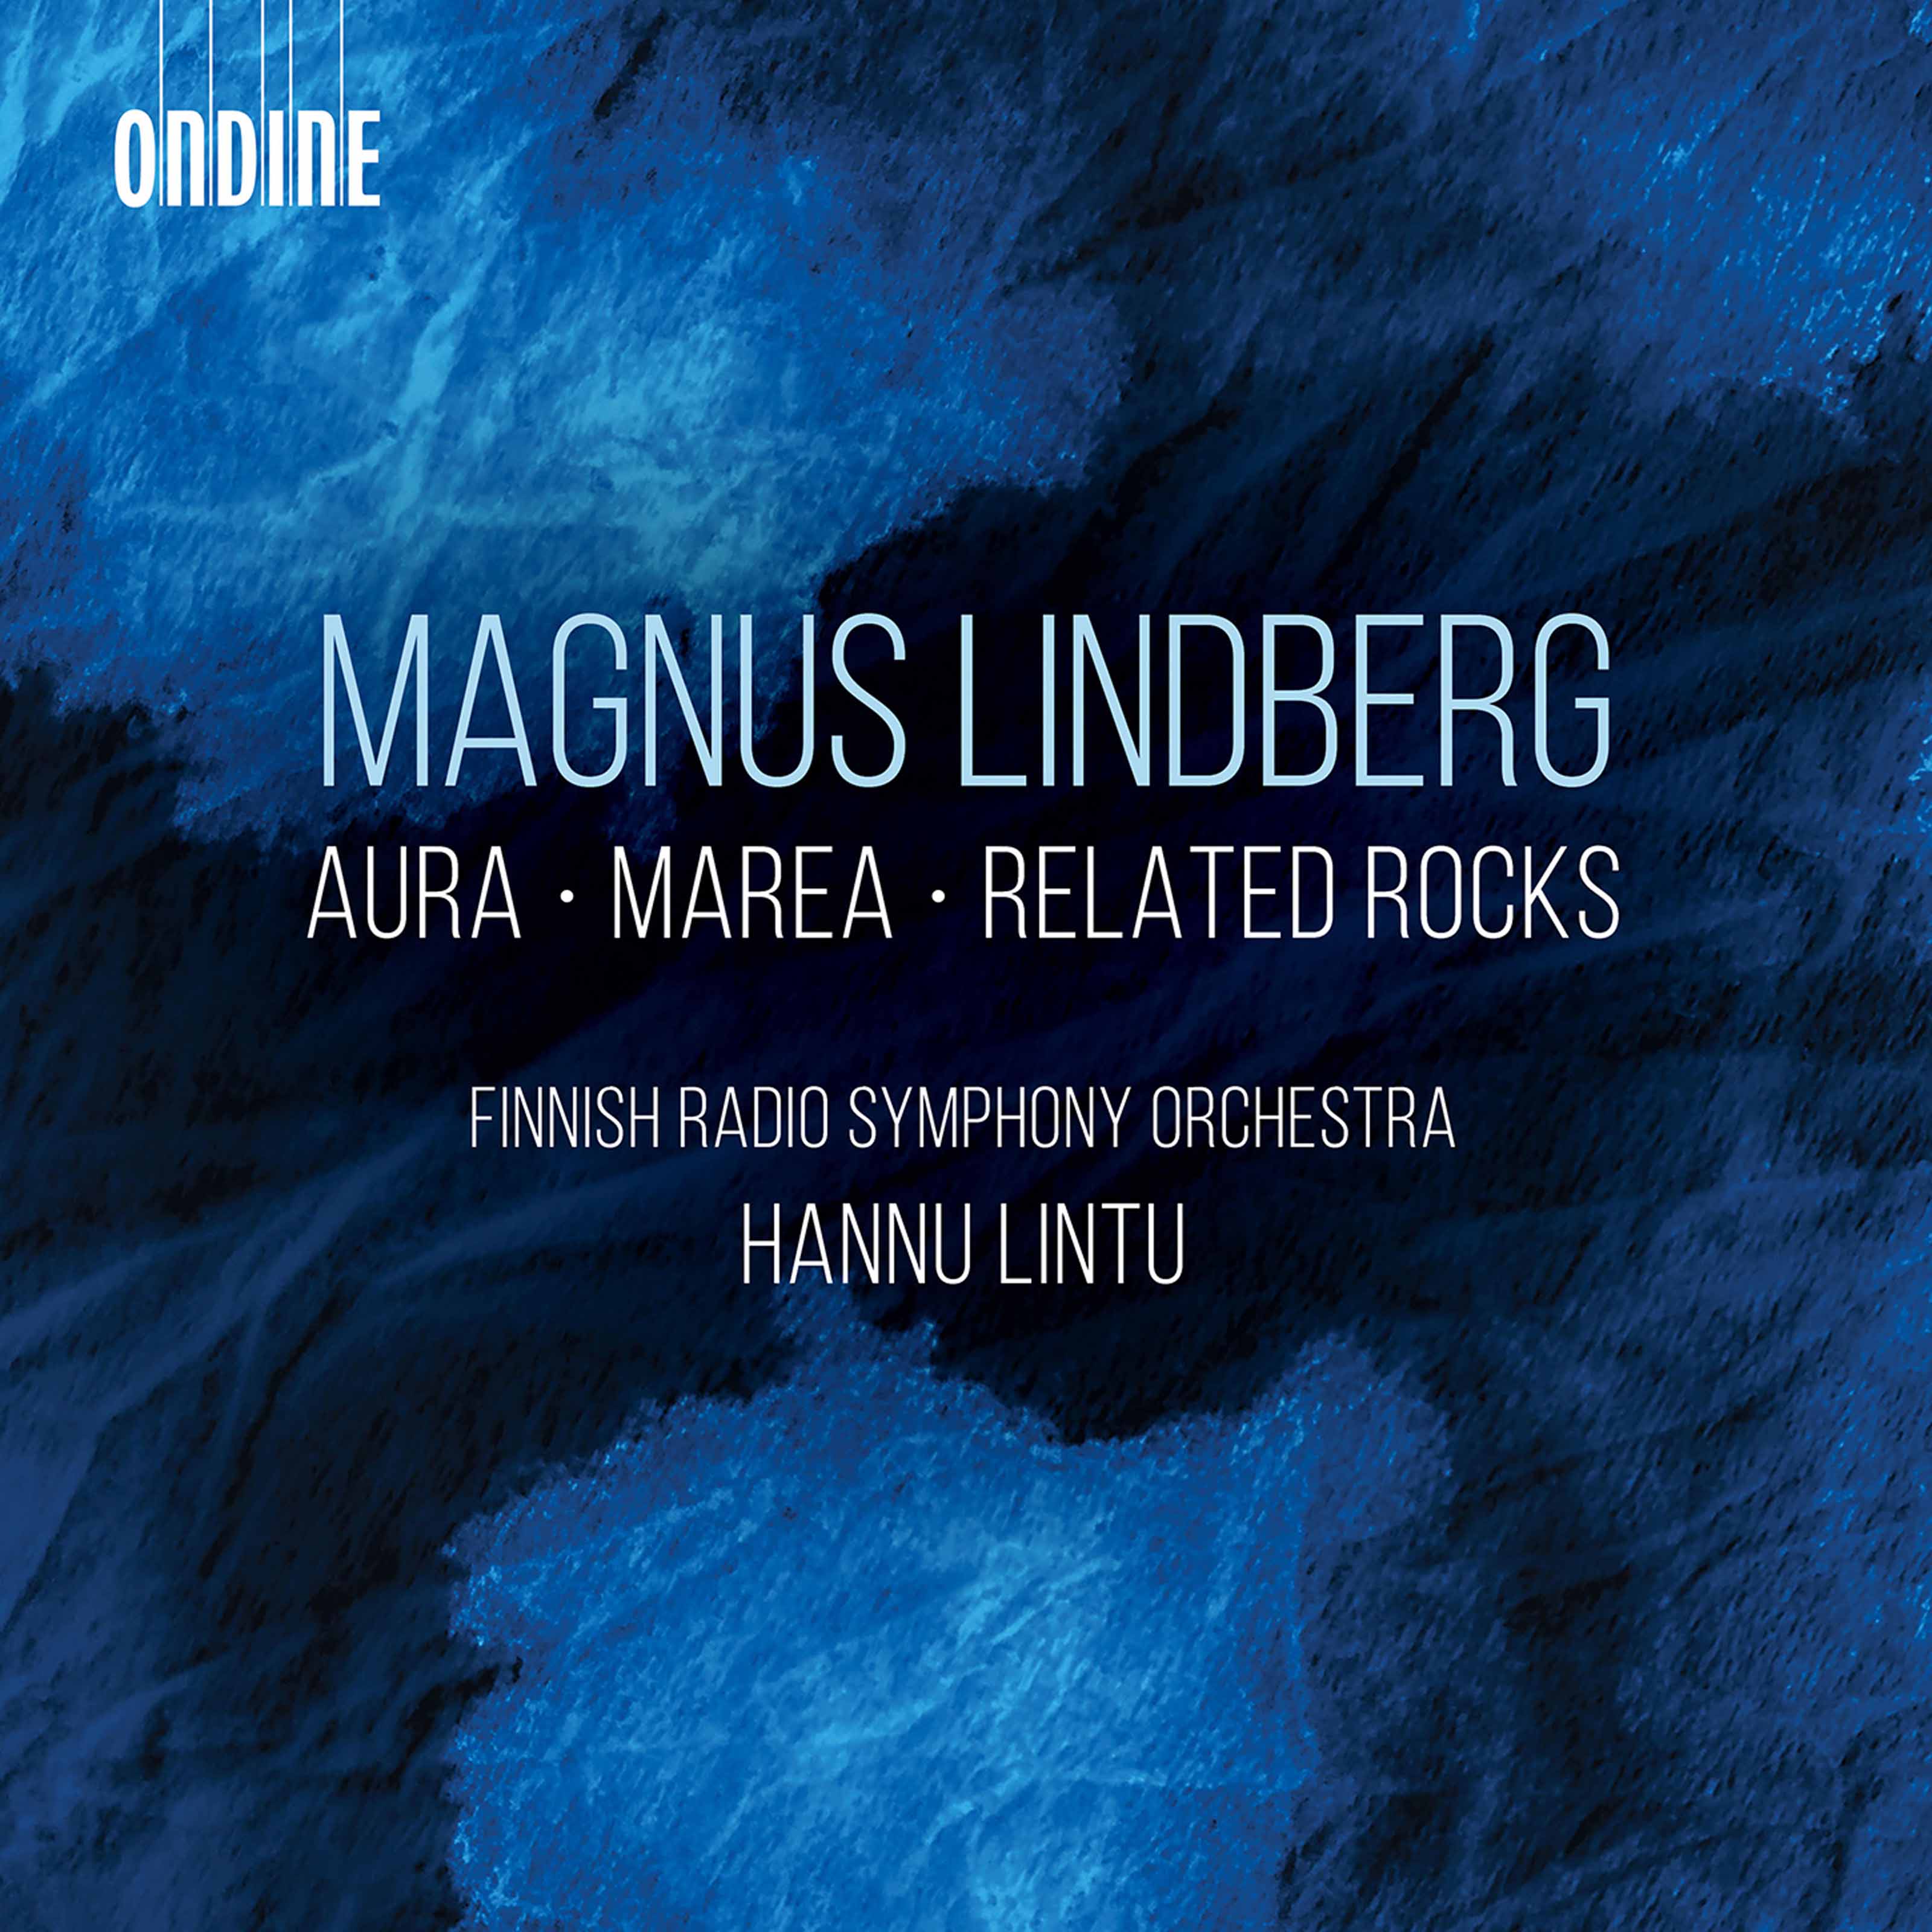 Magnus Lindberg's gritty orchestral music